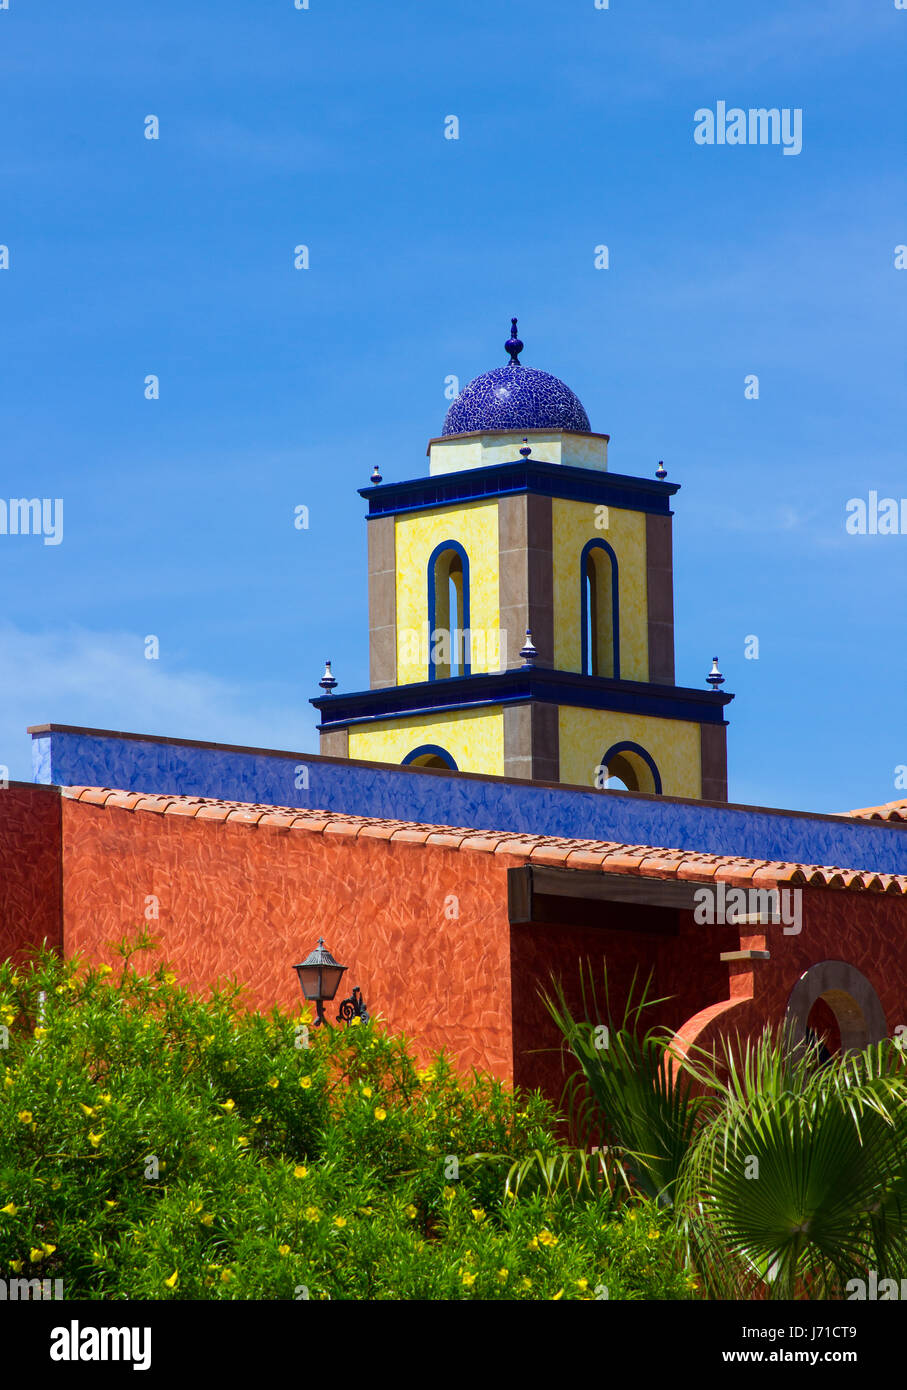 Colorful architectural rooftops in Playa Las Americas in Teneriffe featuring tiled mosaic domes and terracotta tiles in retro Moorish style and design Stock Photo